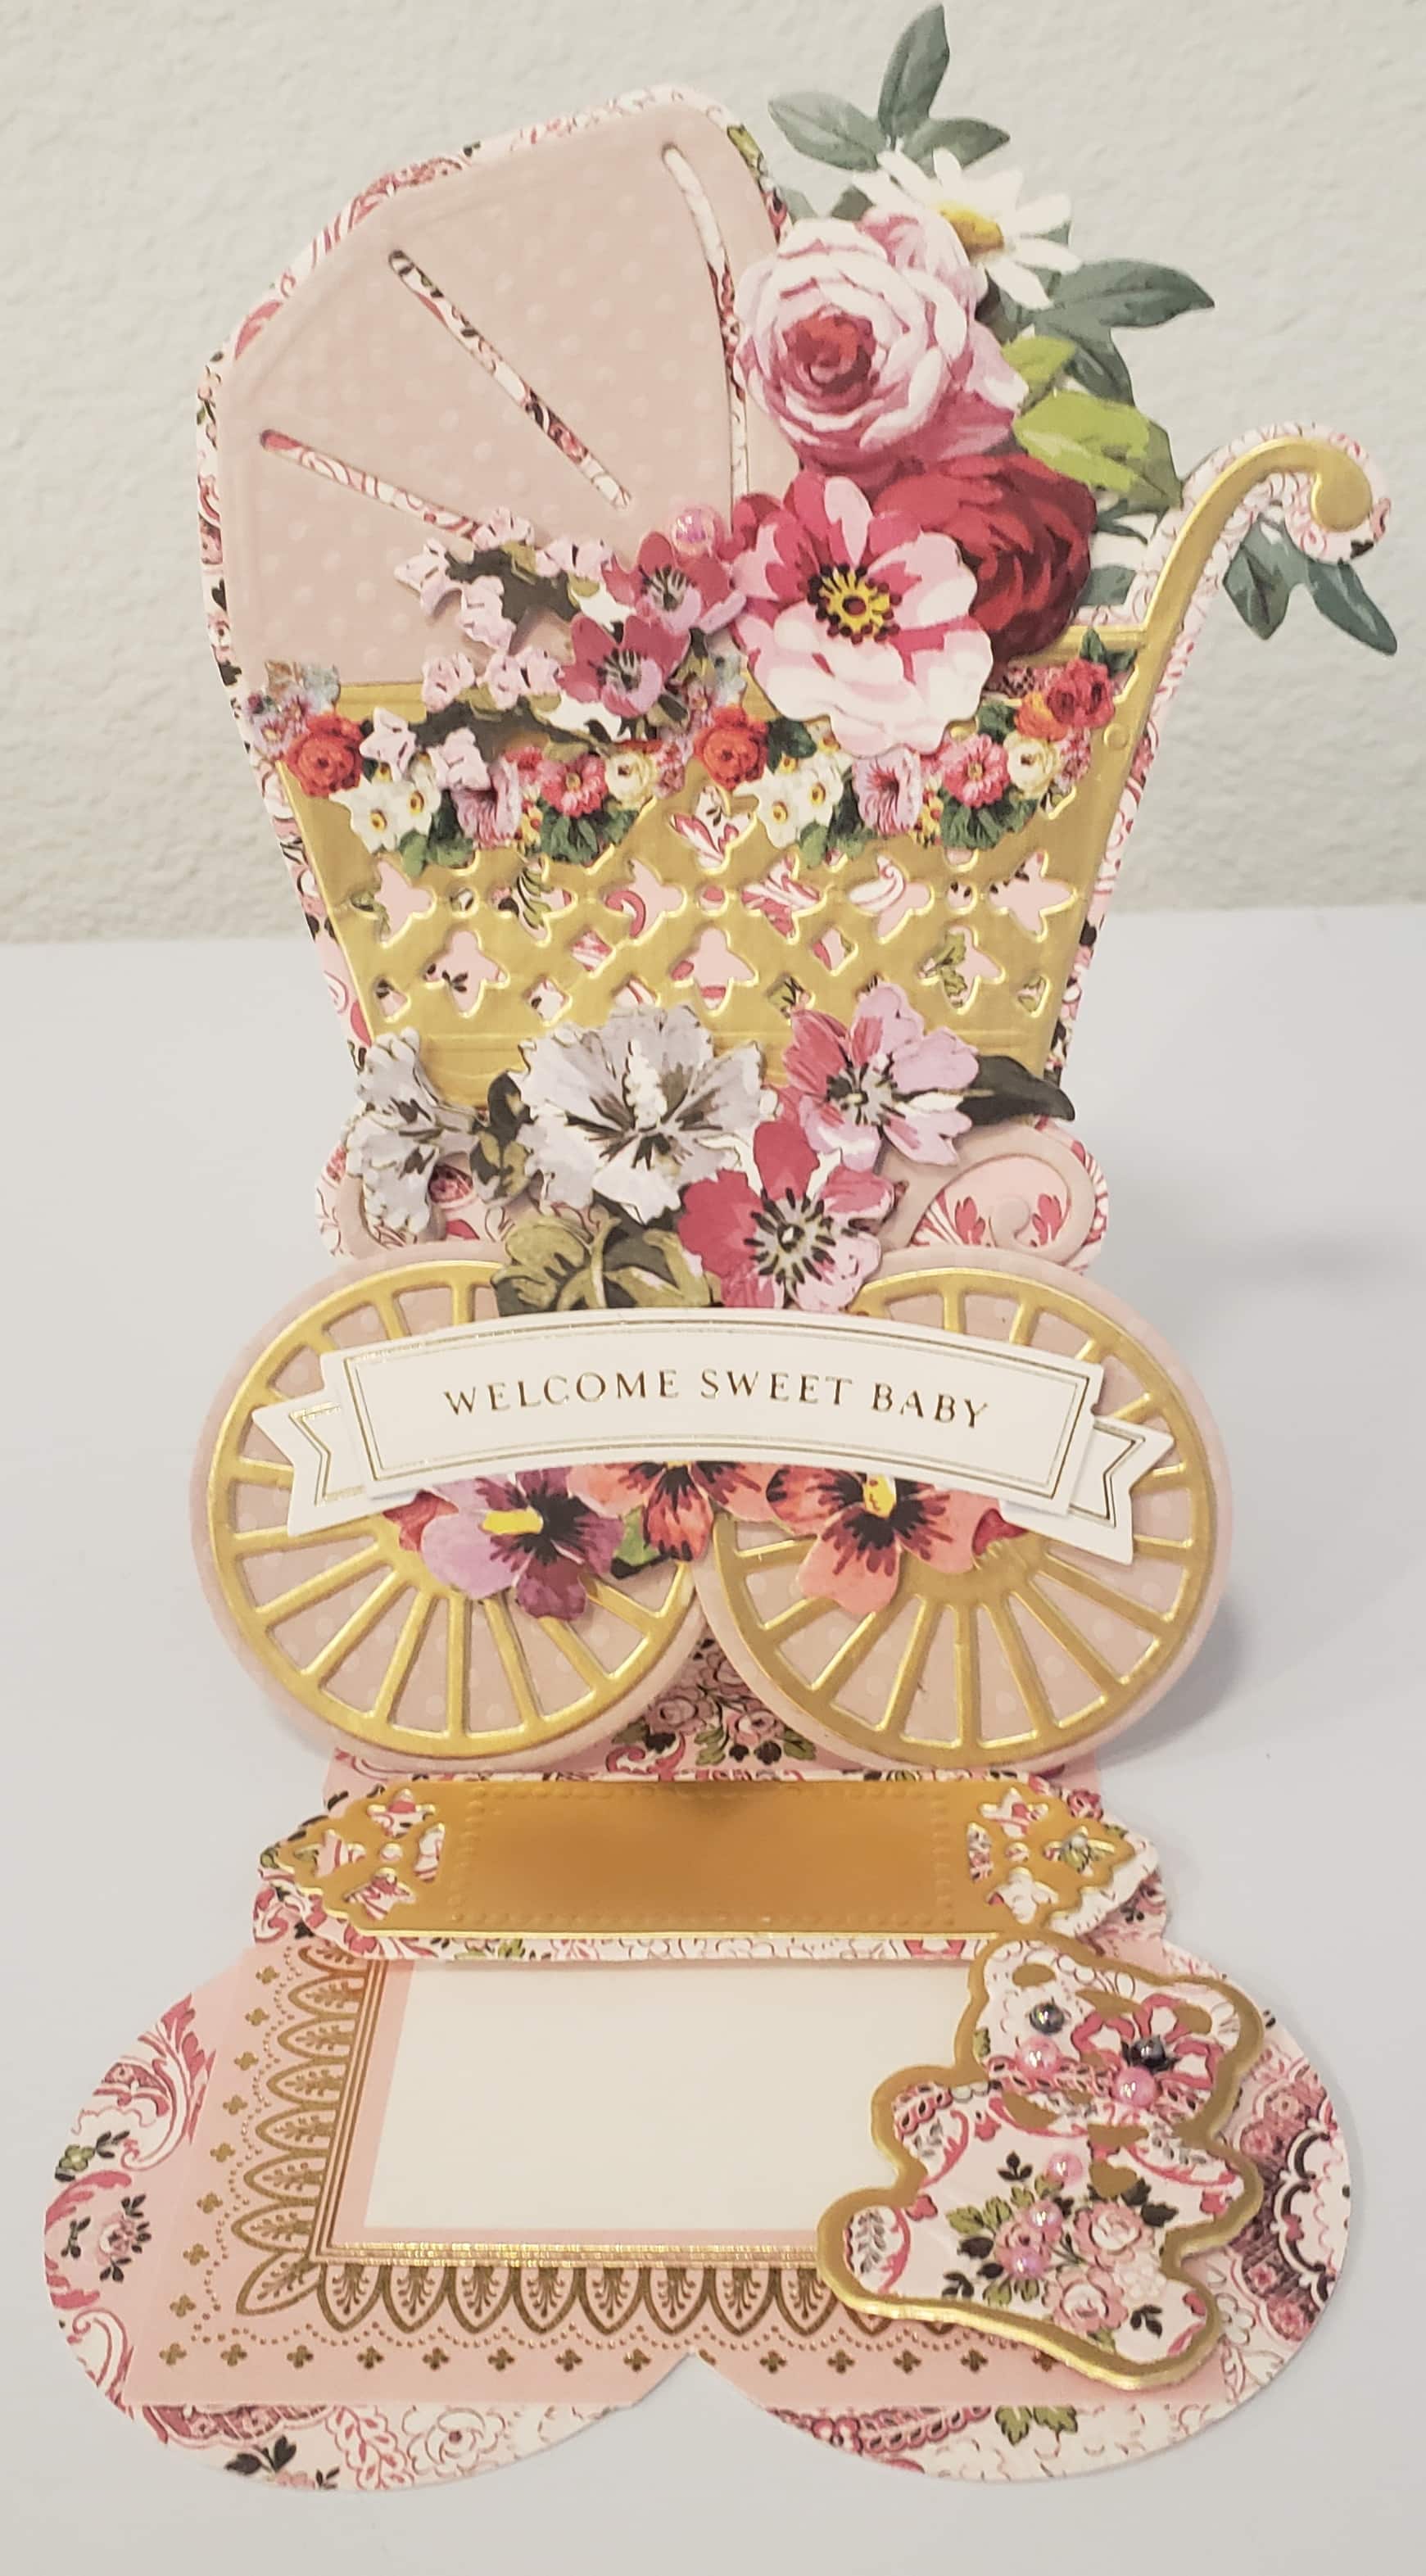 a card with a baby carriage and flowers on it.